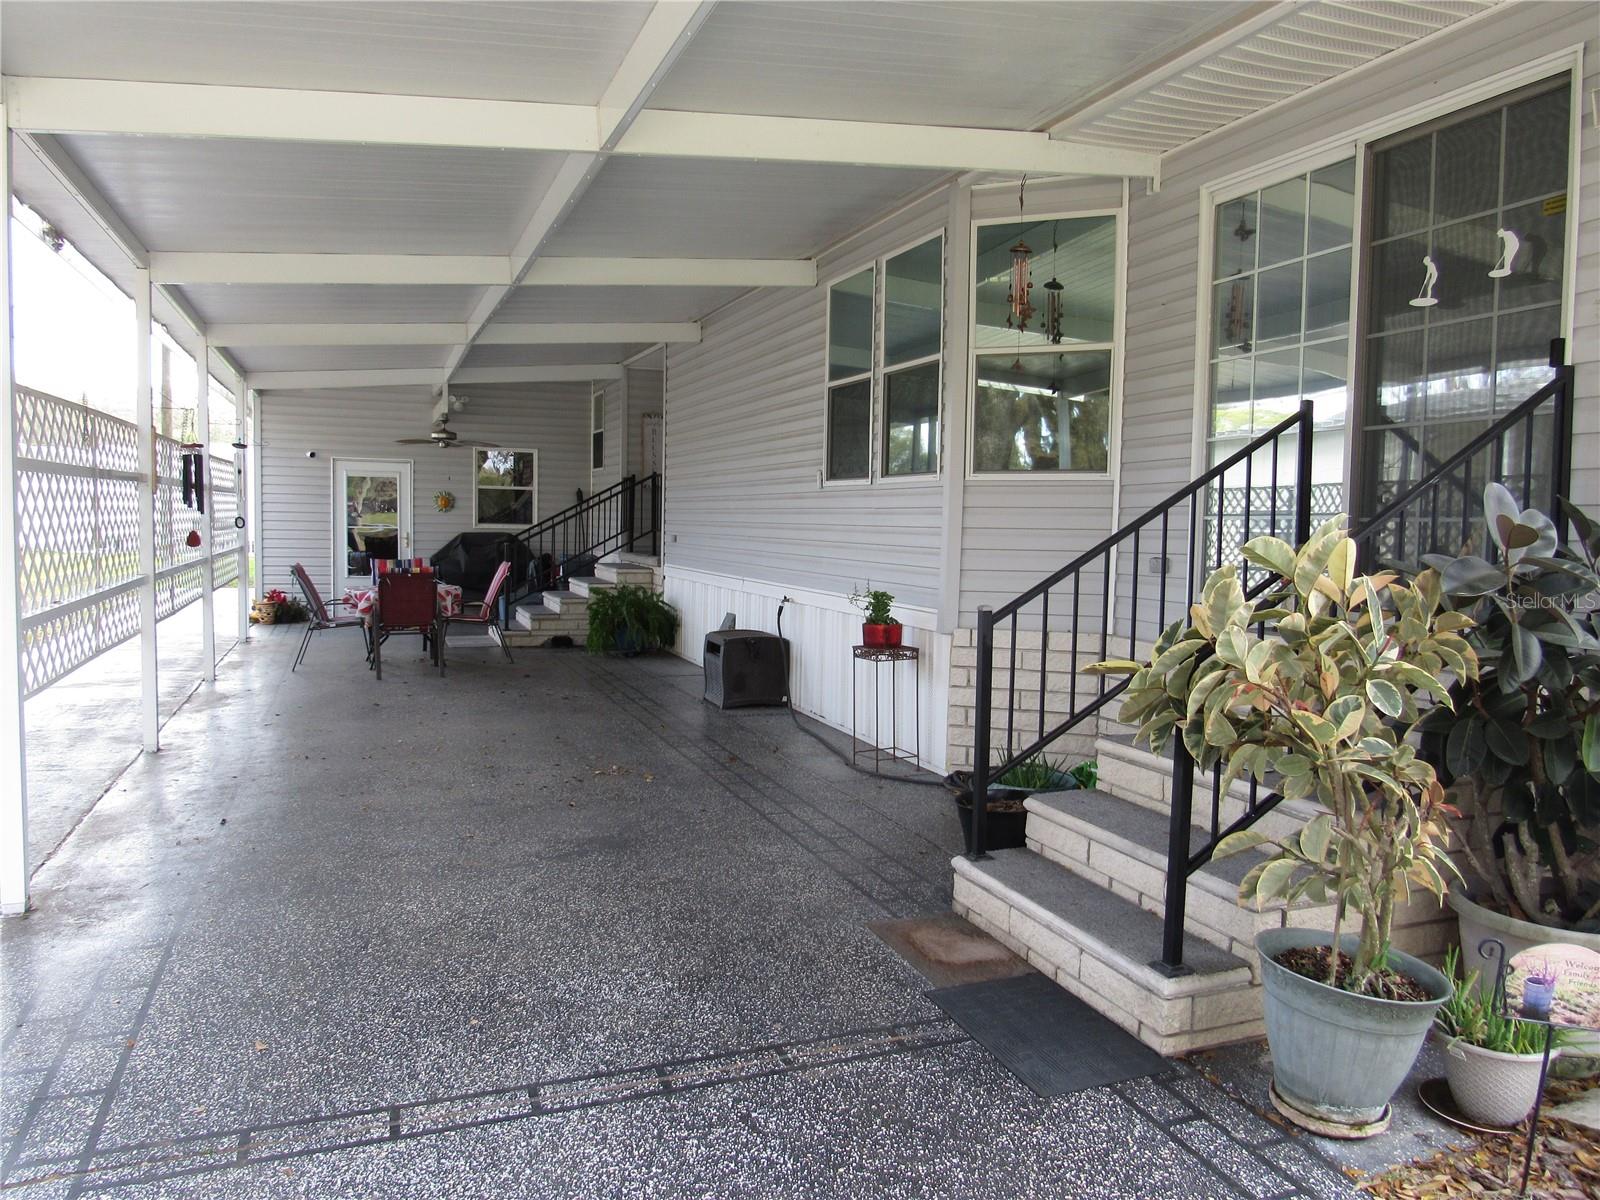 Decorative finished driveway, Florida room entry, carport & seating area.